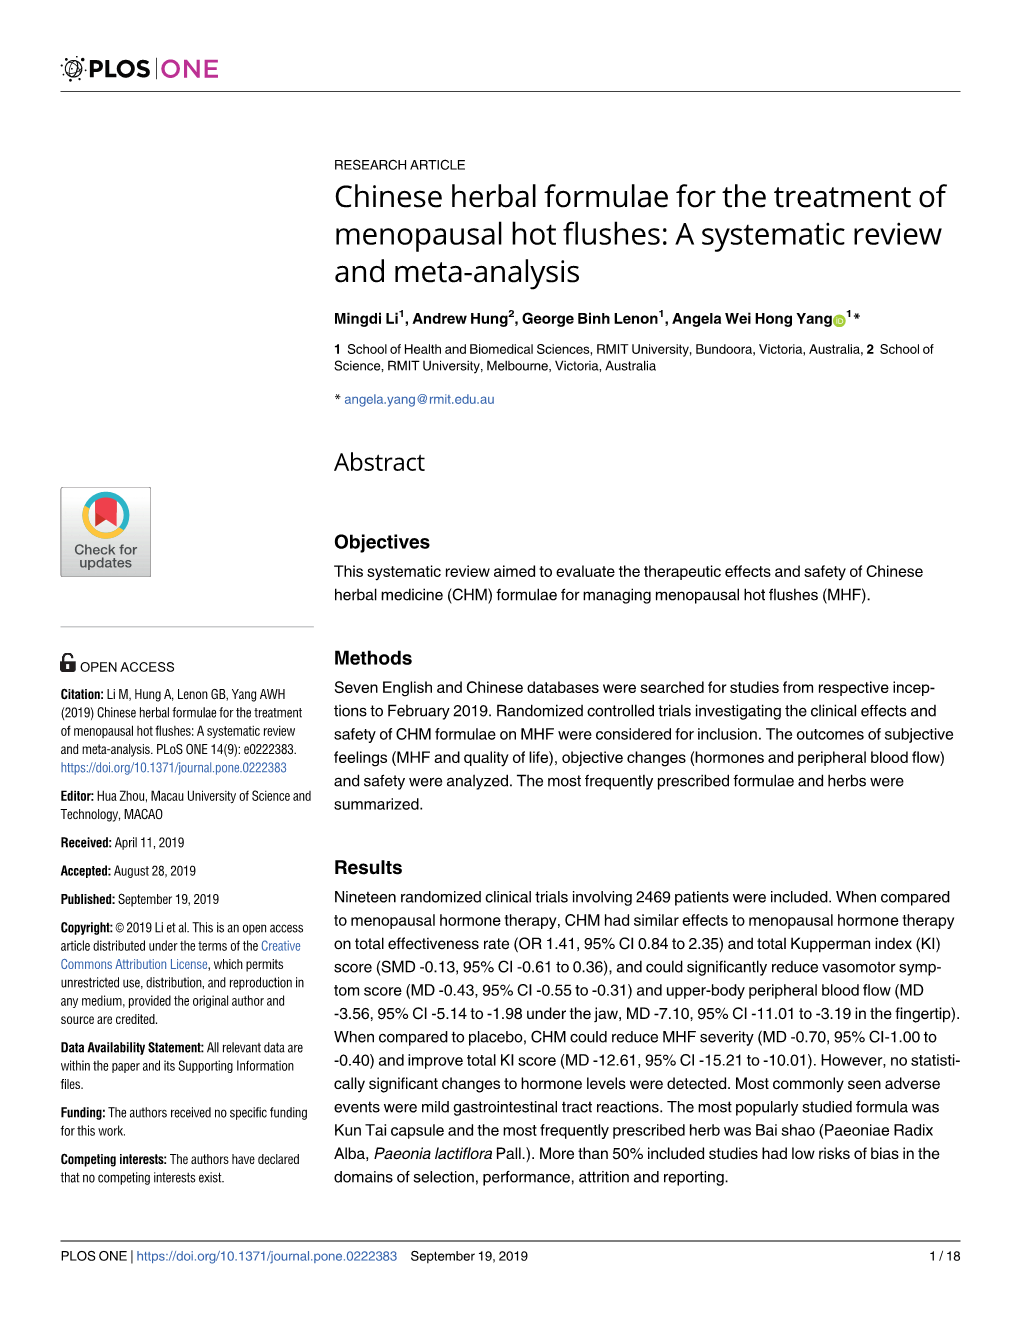 Chinese Herbal Formulae for the Treatment of Menopausal Hot Flushes: a Systematic Review and Meta-Analysis